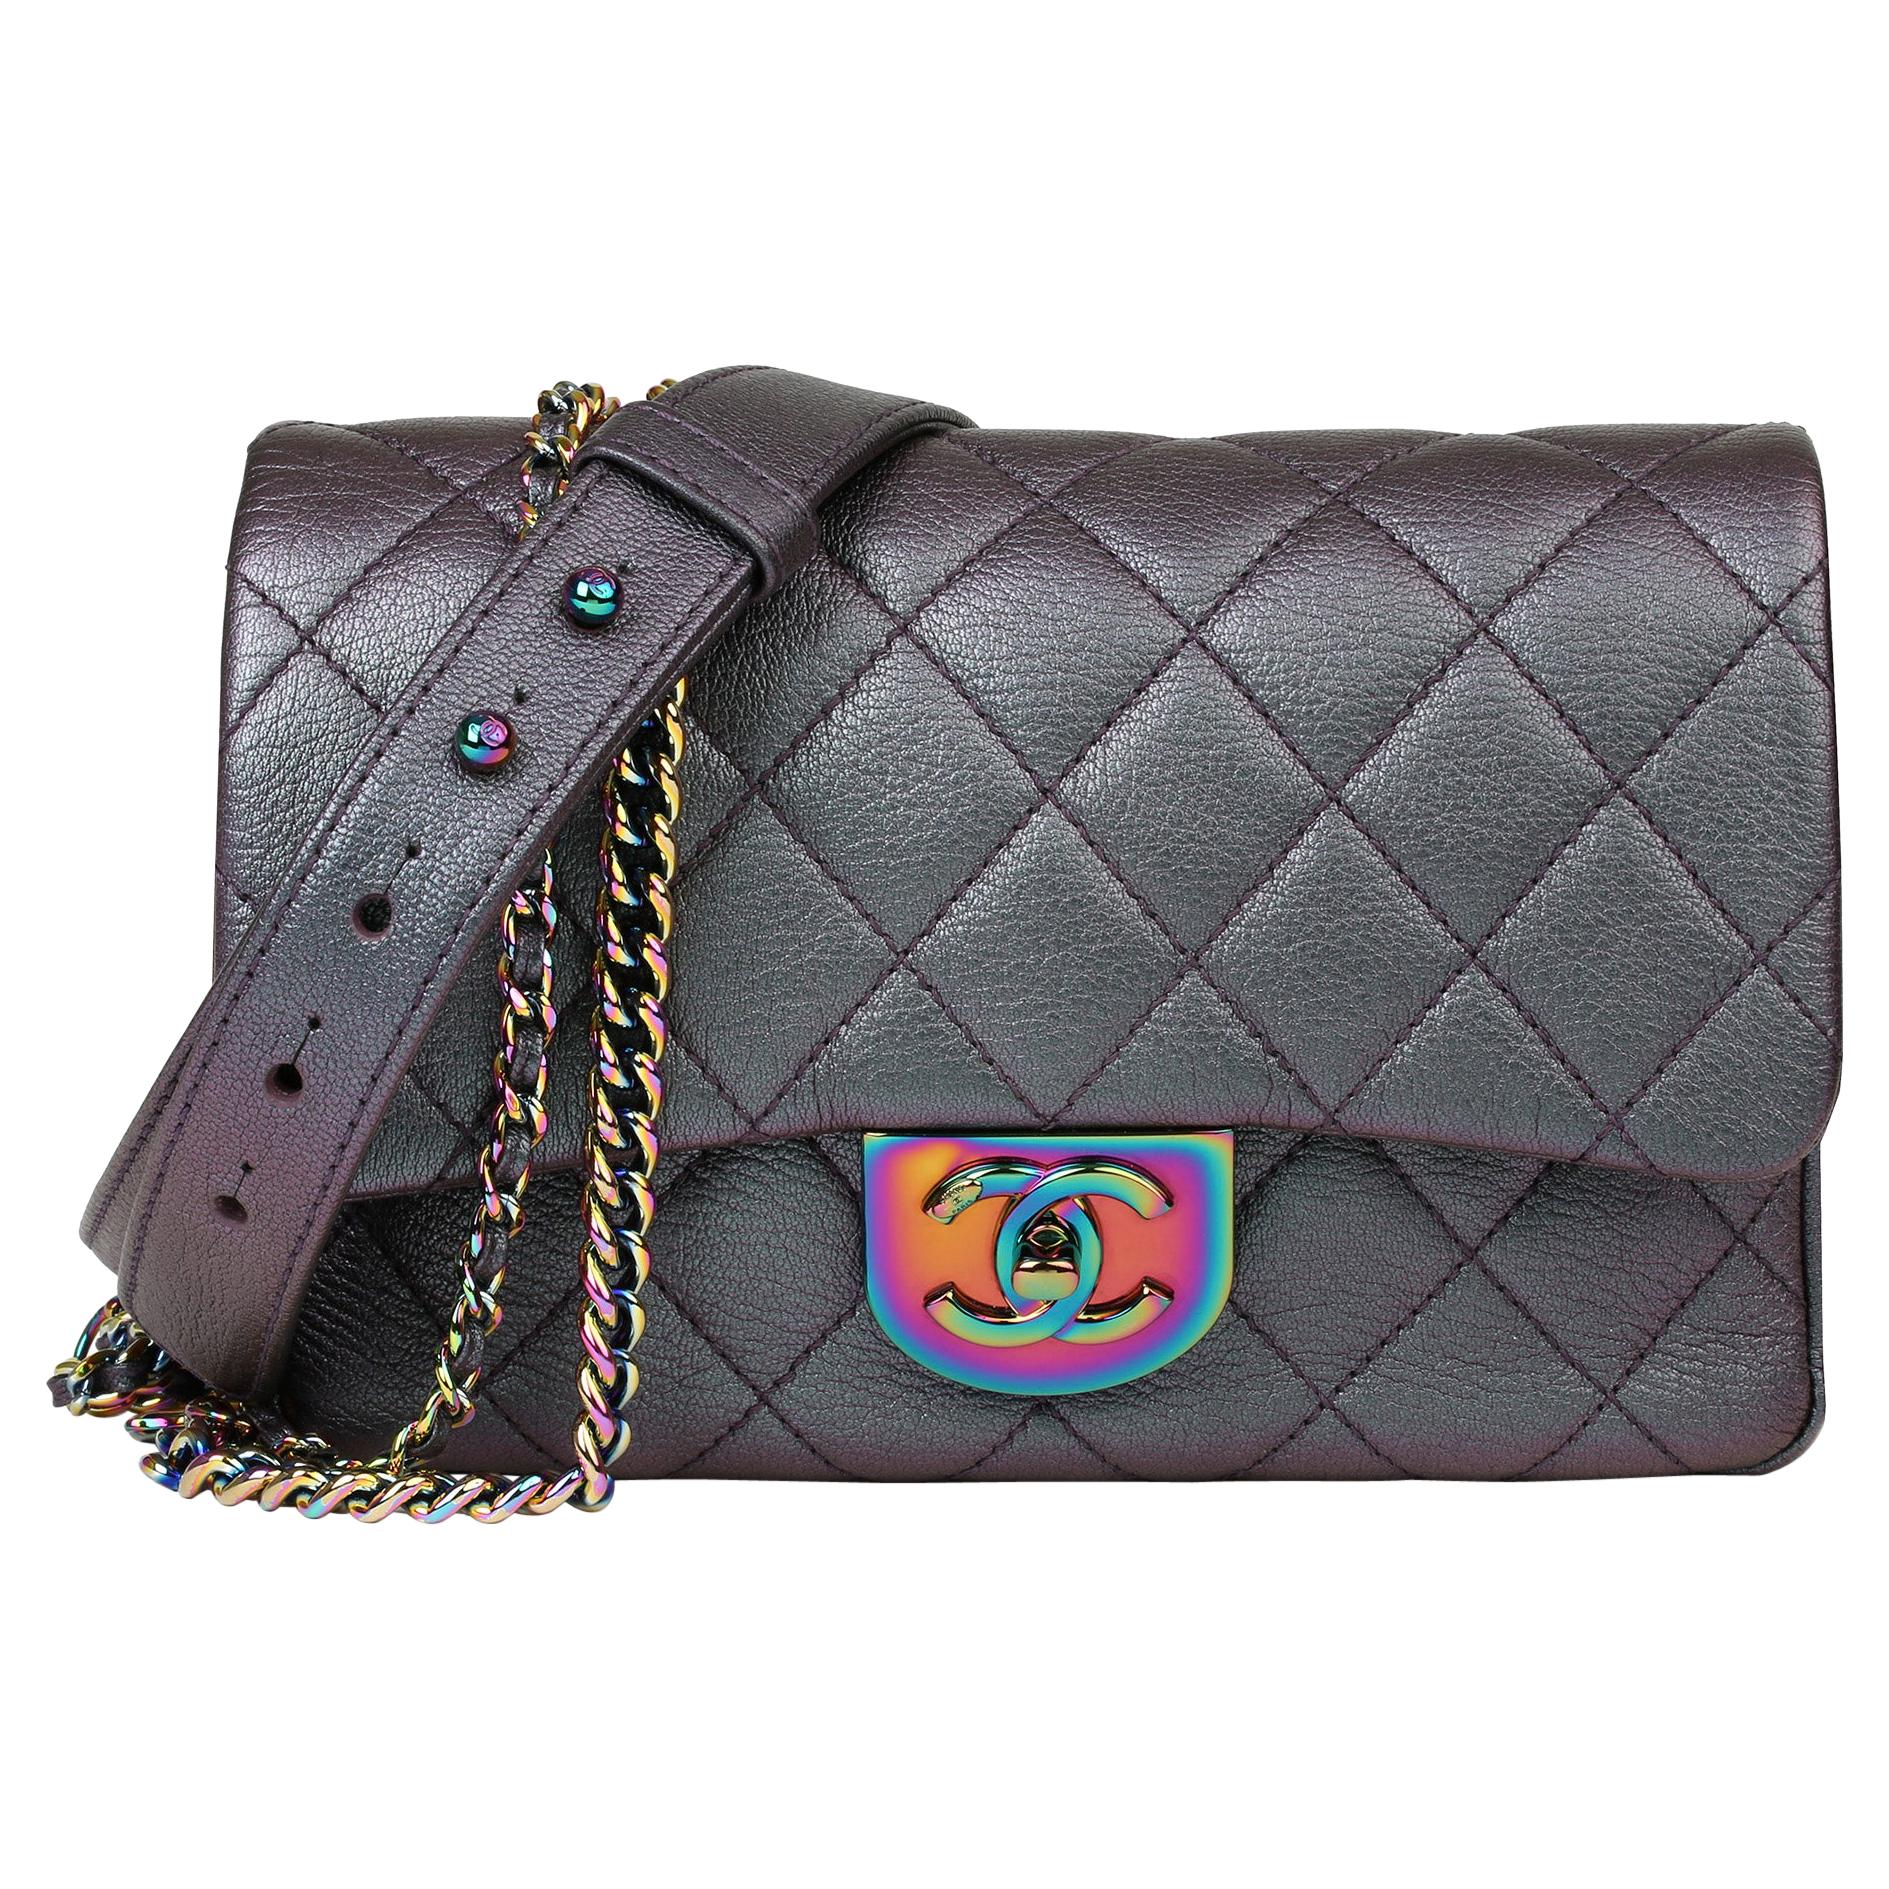 2016 Chanel Iridescent Quilted Calfskin Leather Small Double Carry Flap Bag